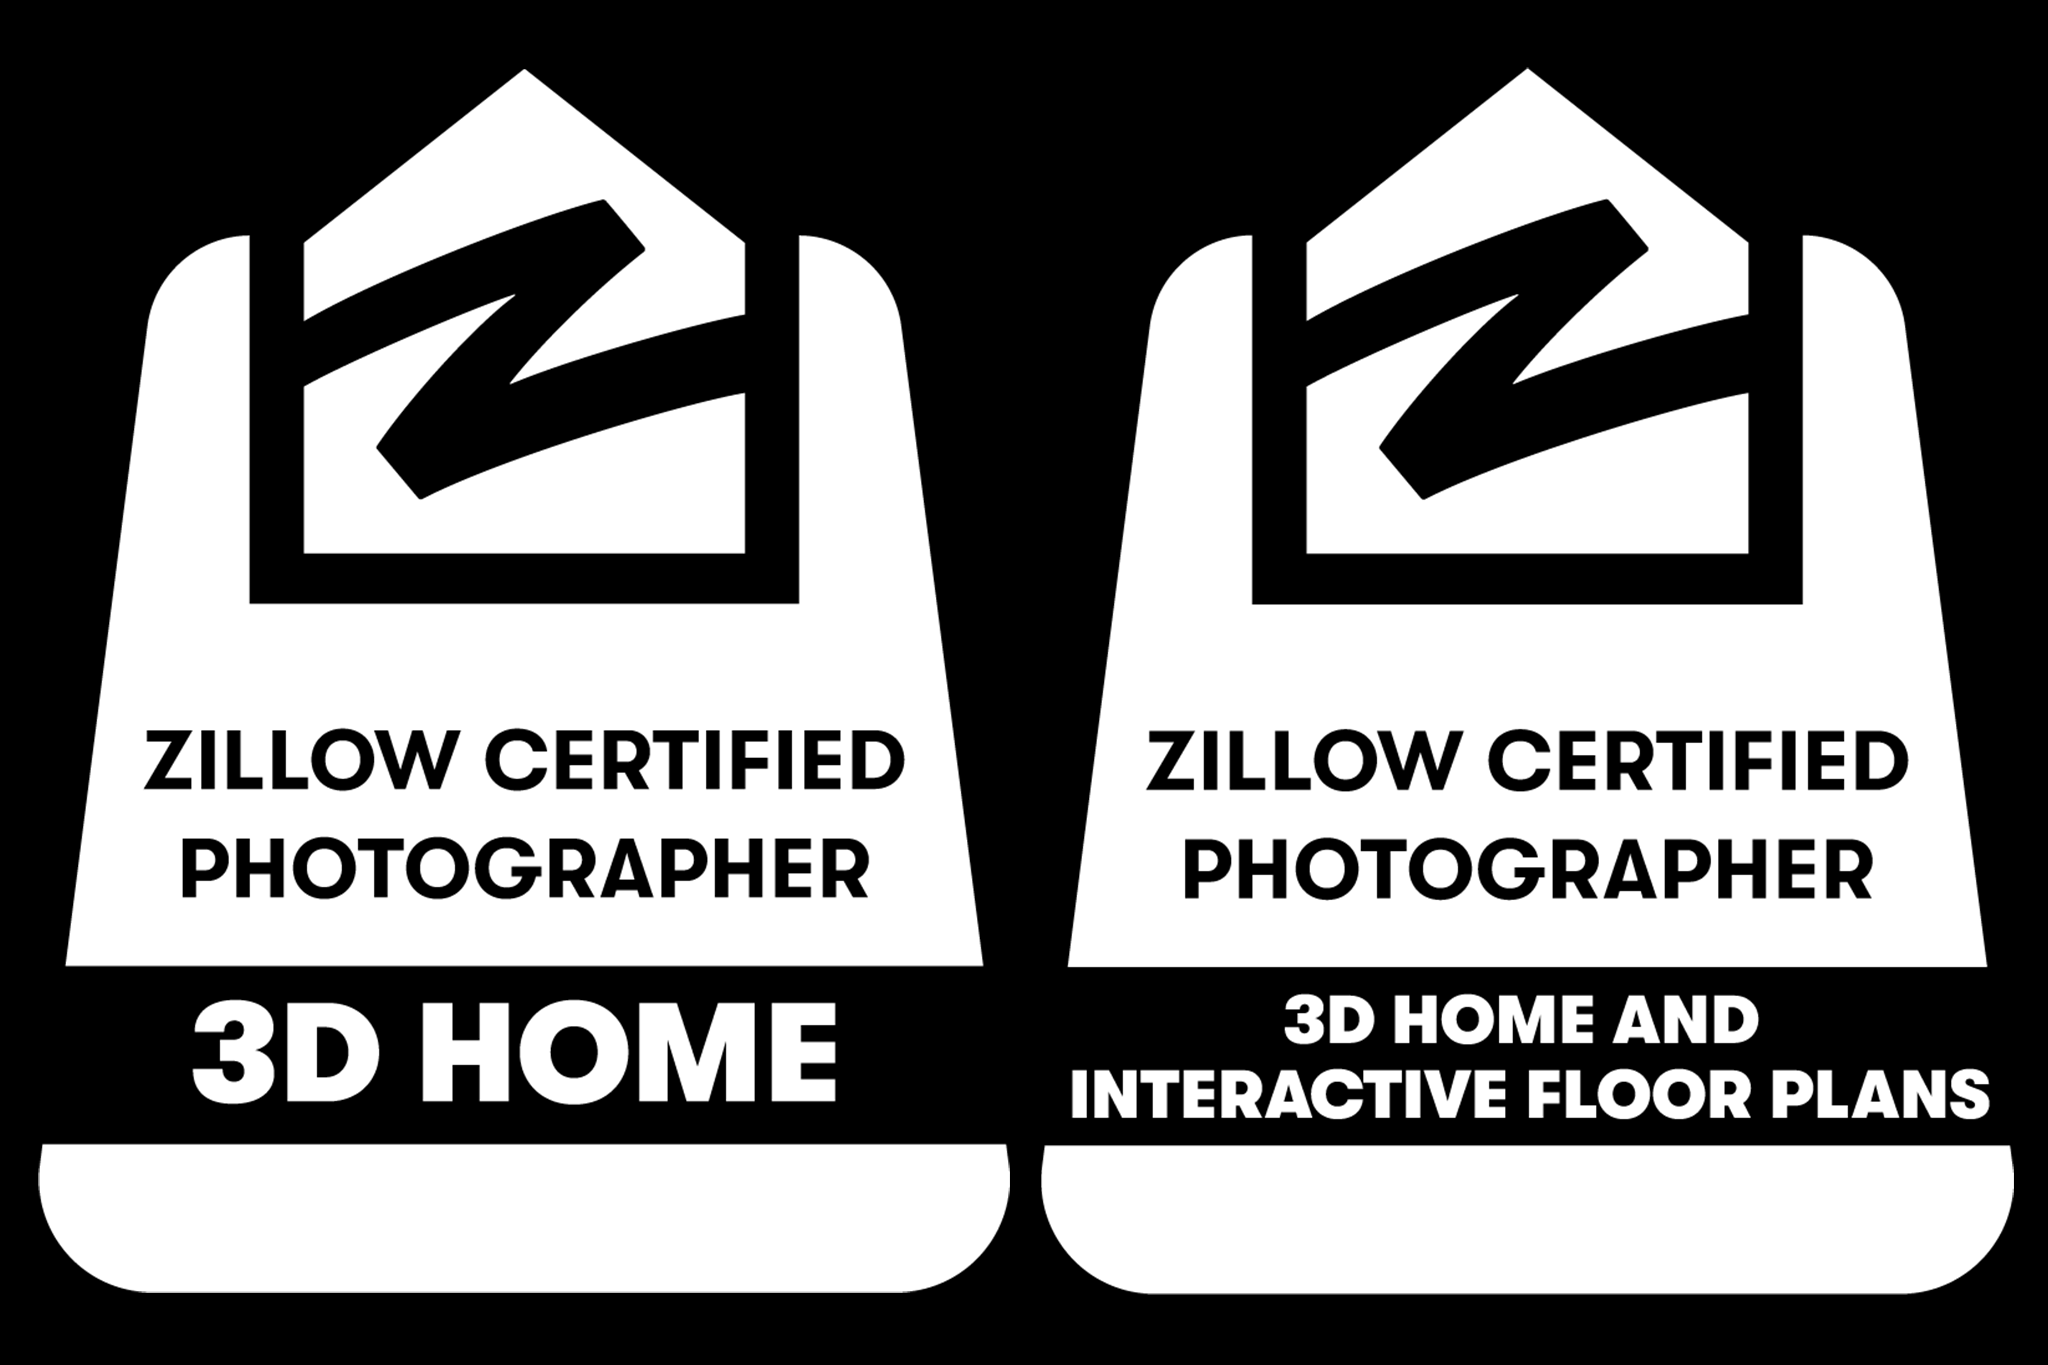 Las Vegas Zillow Certified Photographer - Vik Chohan Photography & Photo Booth - Real Esate Photography - Zillow 3D Tours - White.png